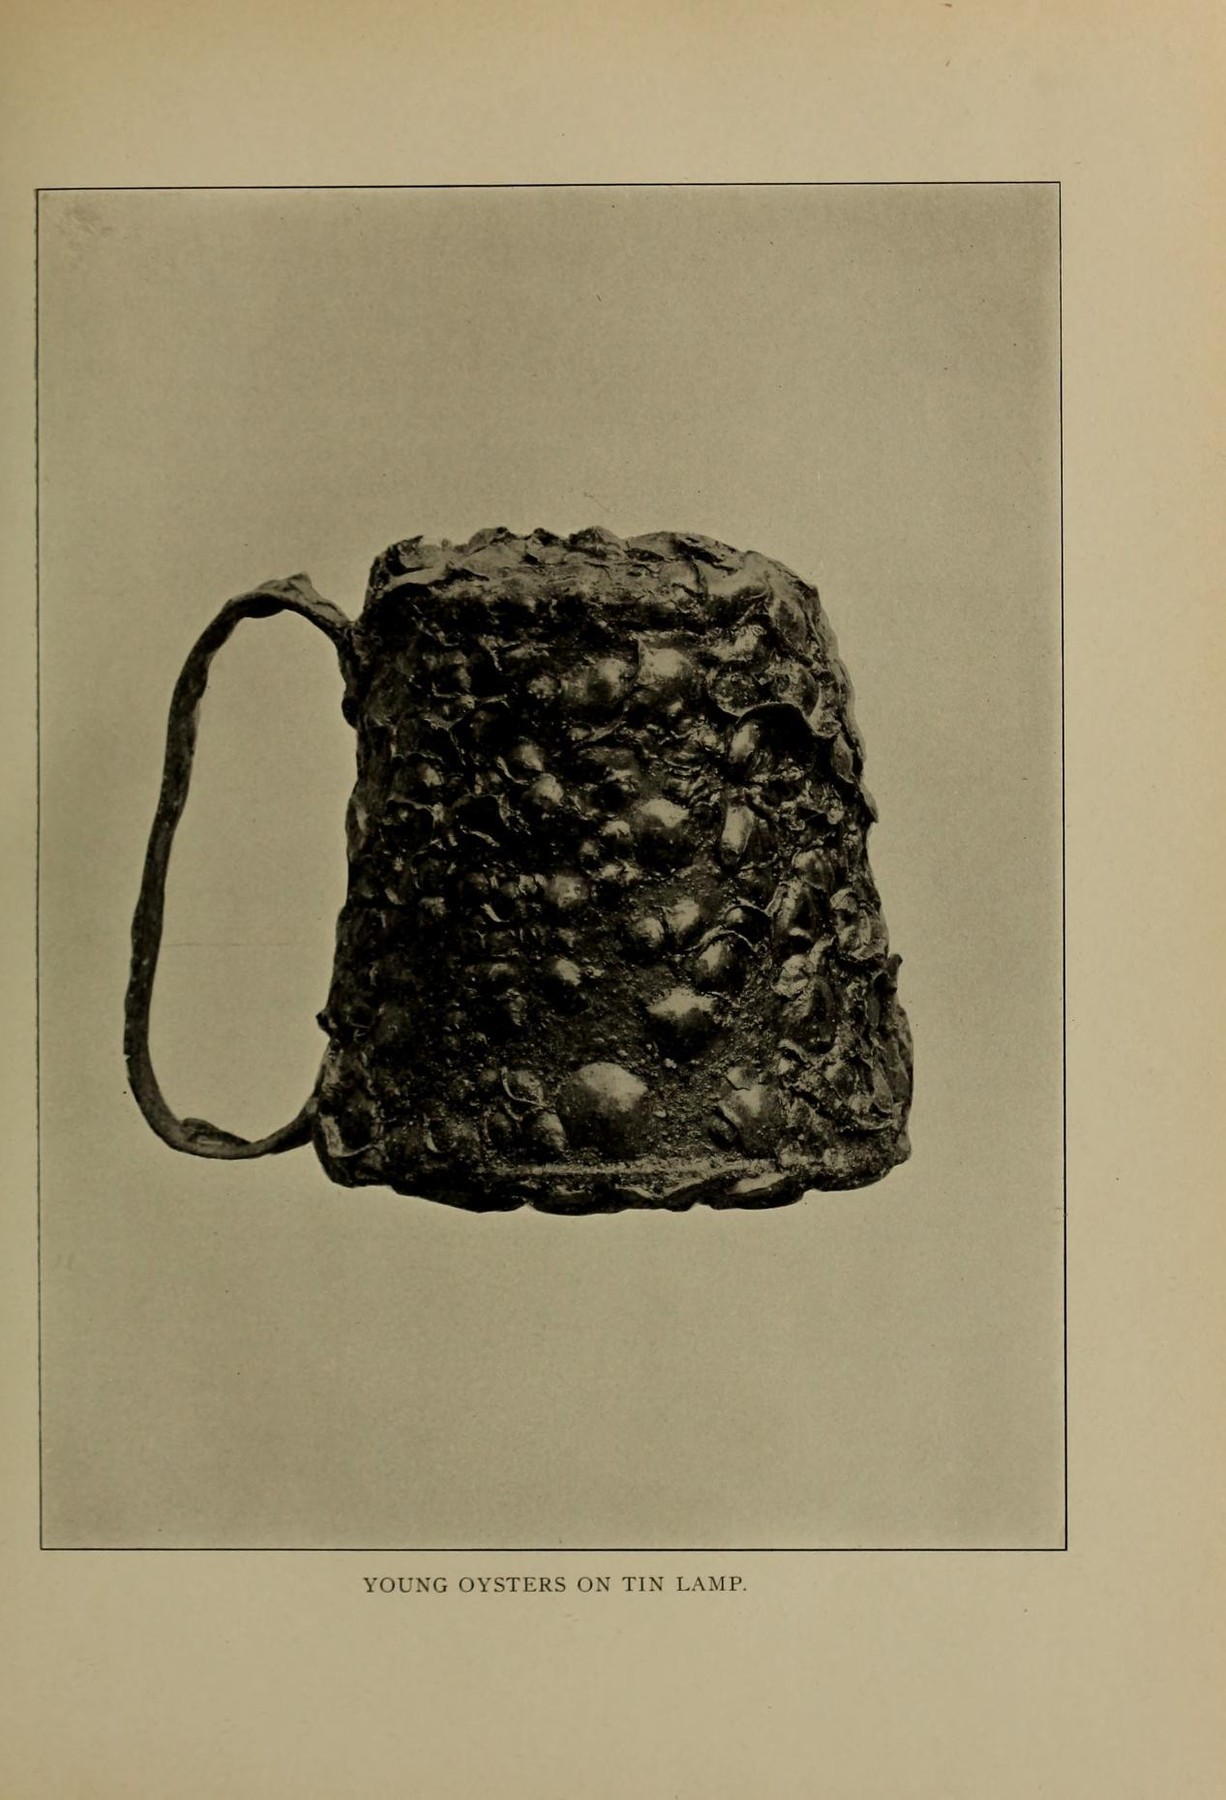 oyster-encrusted objects in an article entitled “The Perils of a Young Oyster” from the Eleventh Annual Report of the Forest, Fish, and Game Commissioner of the State of New York (1905).